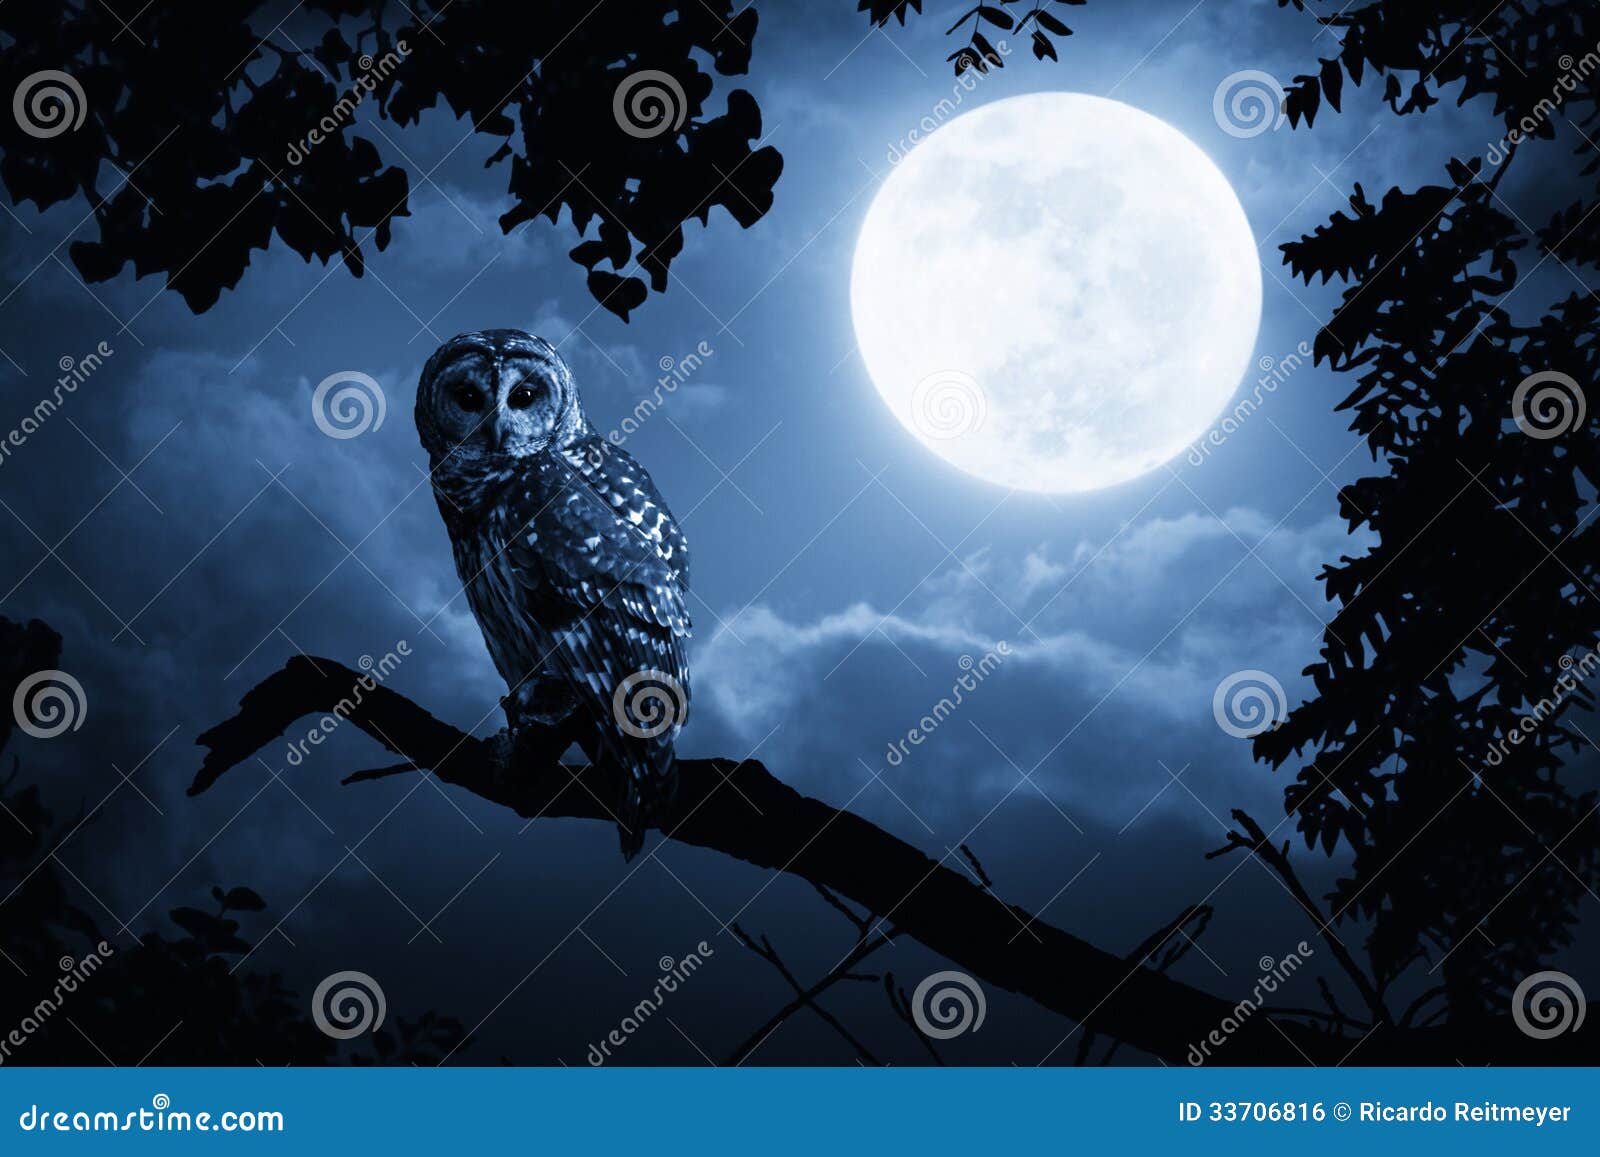 owl watches intently illuminated by full moon